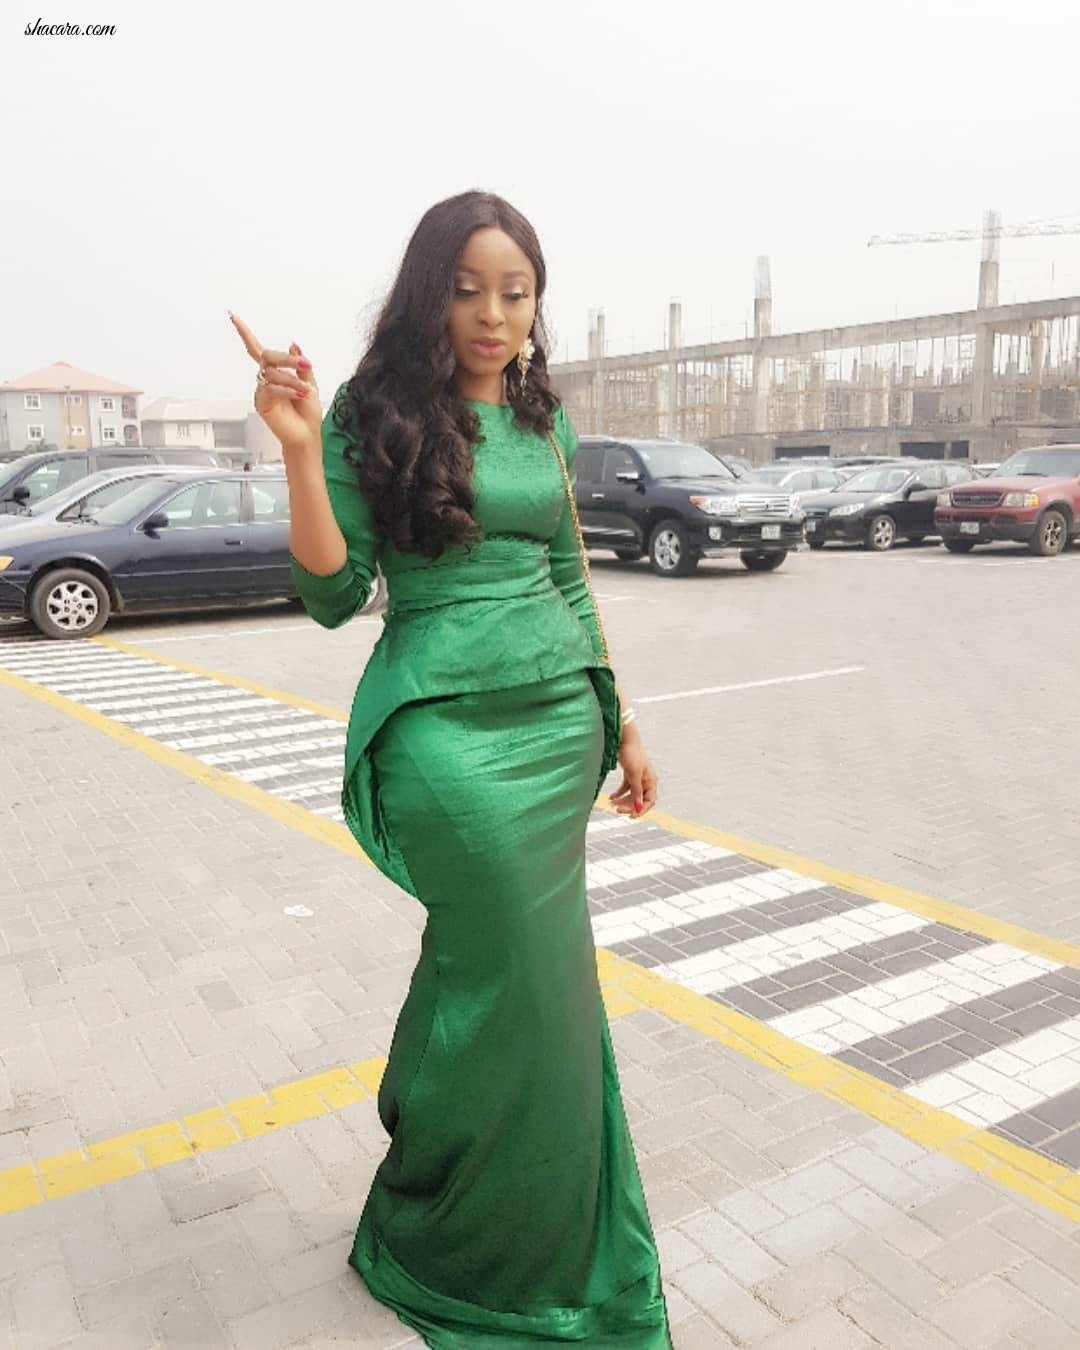 GREEN RUSH!LATEST ASO EBI STYLES FROM THE OWAMBE PARTIES